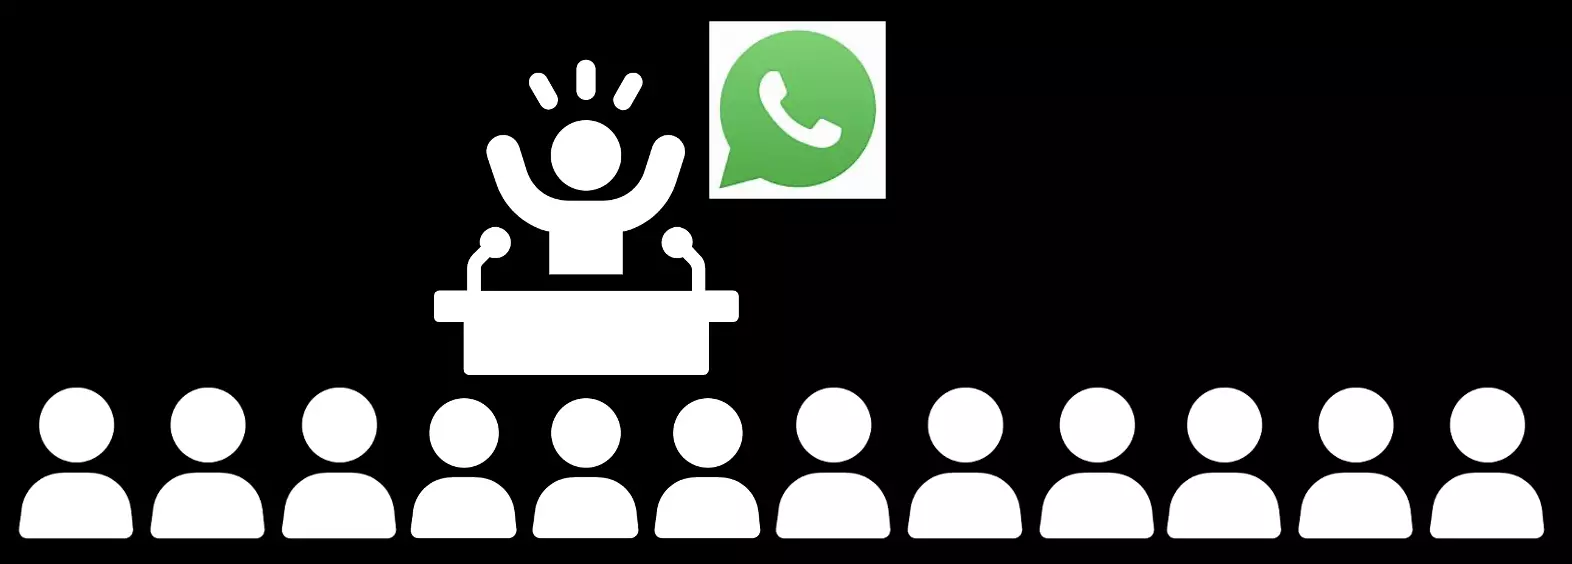 Political Messages On WhatsApp: Legal Or Not